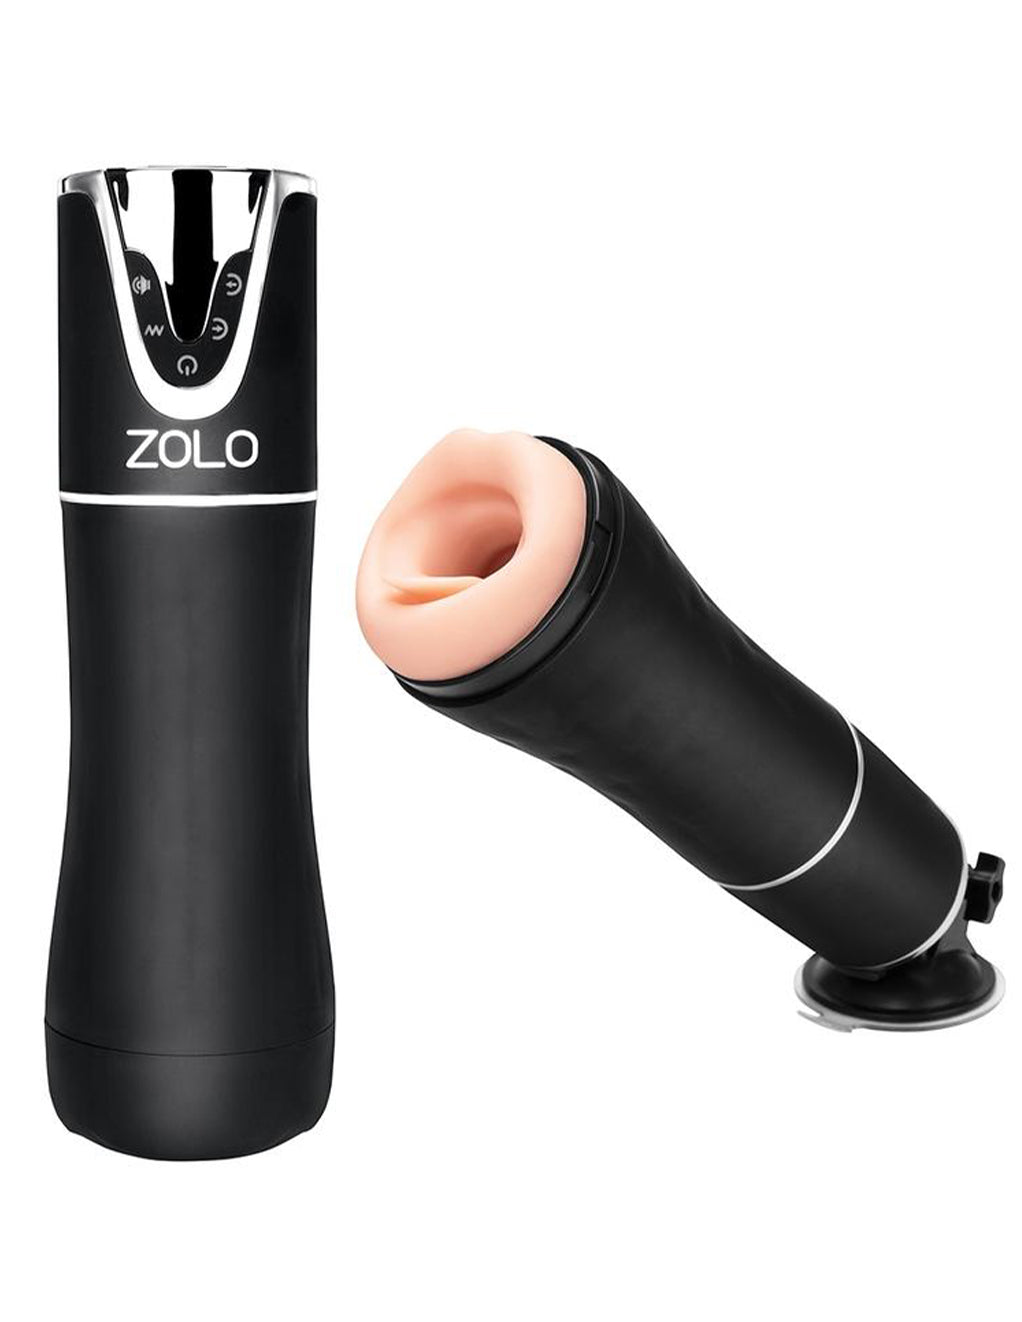 Zolo Automatic Blowjob Sex Toys at Hustler Hollywood image